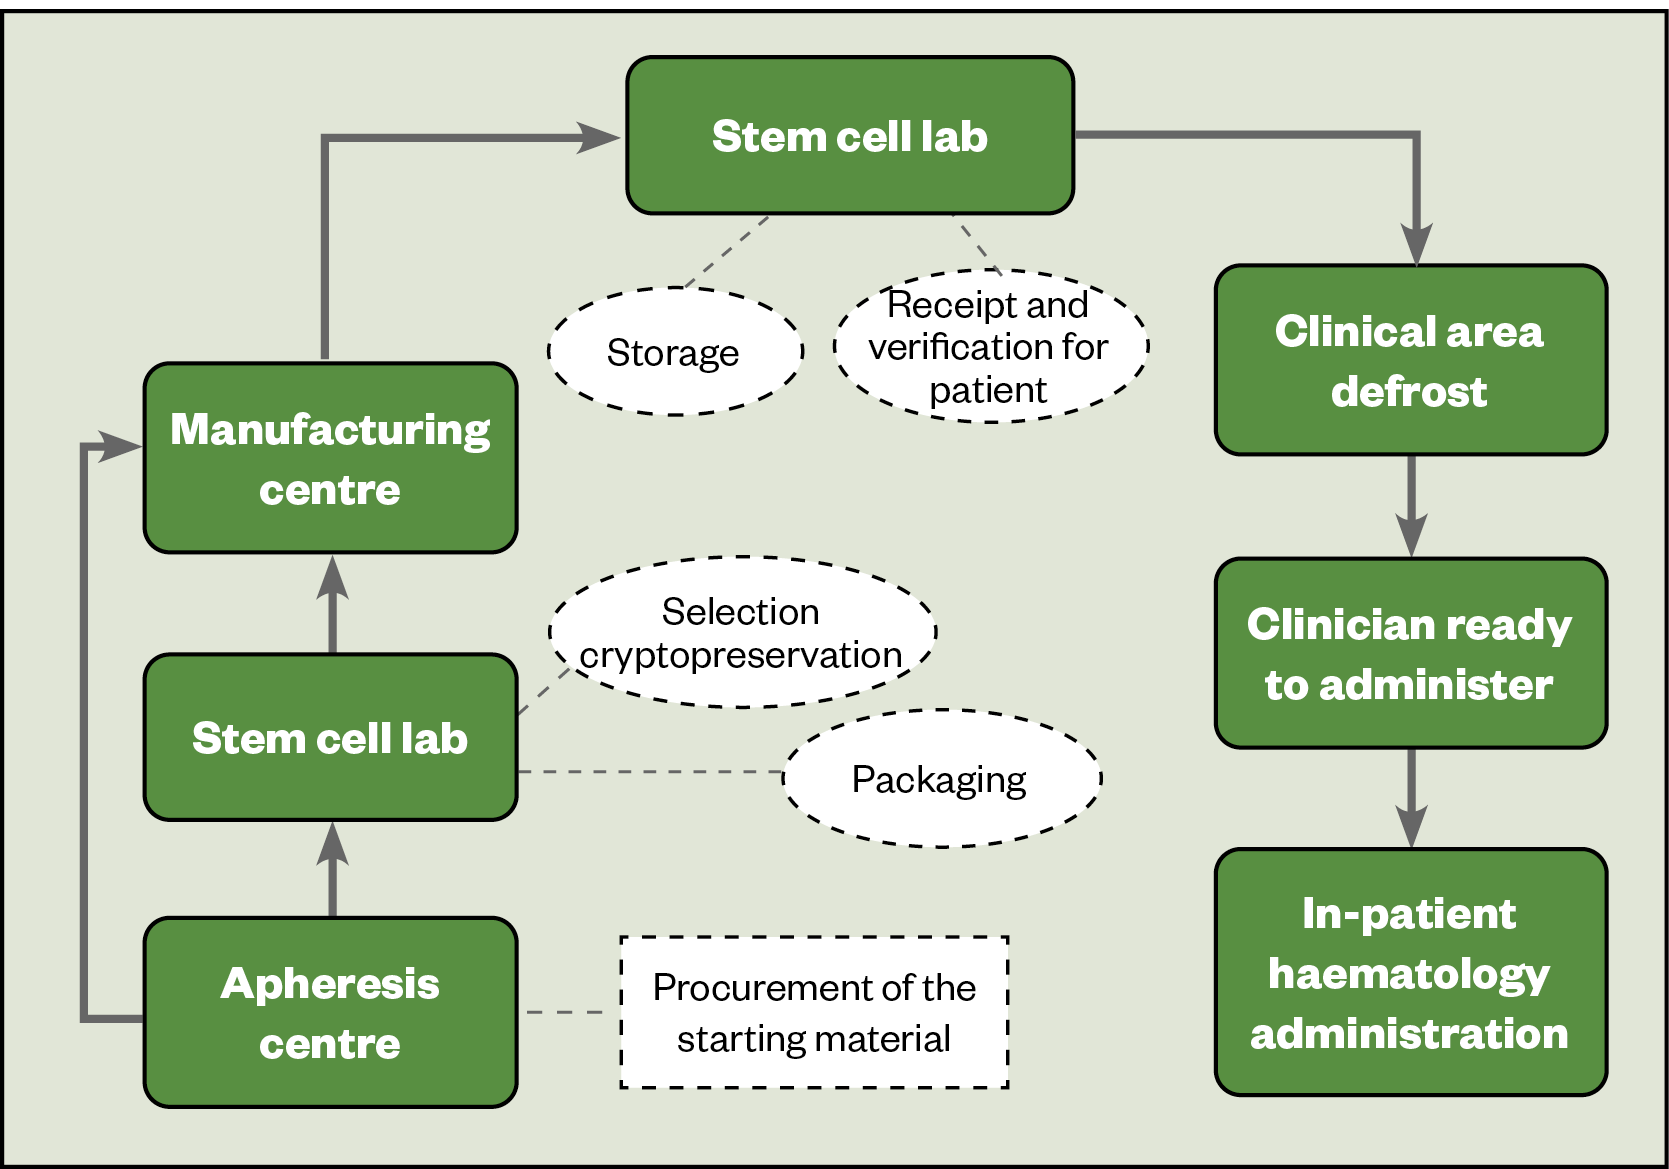 Figure 3: The product journey for chimeric antigen receptor T-cell therapy